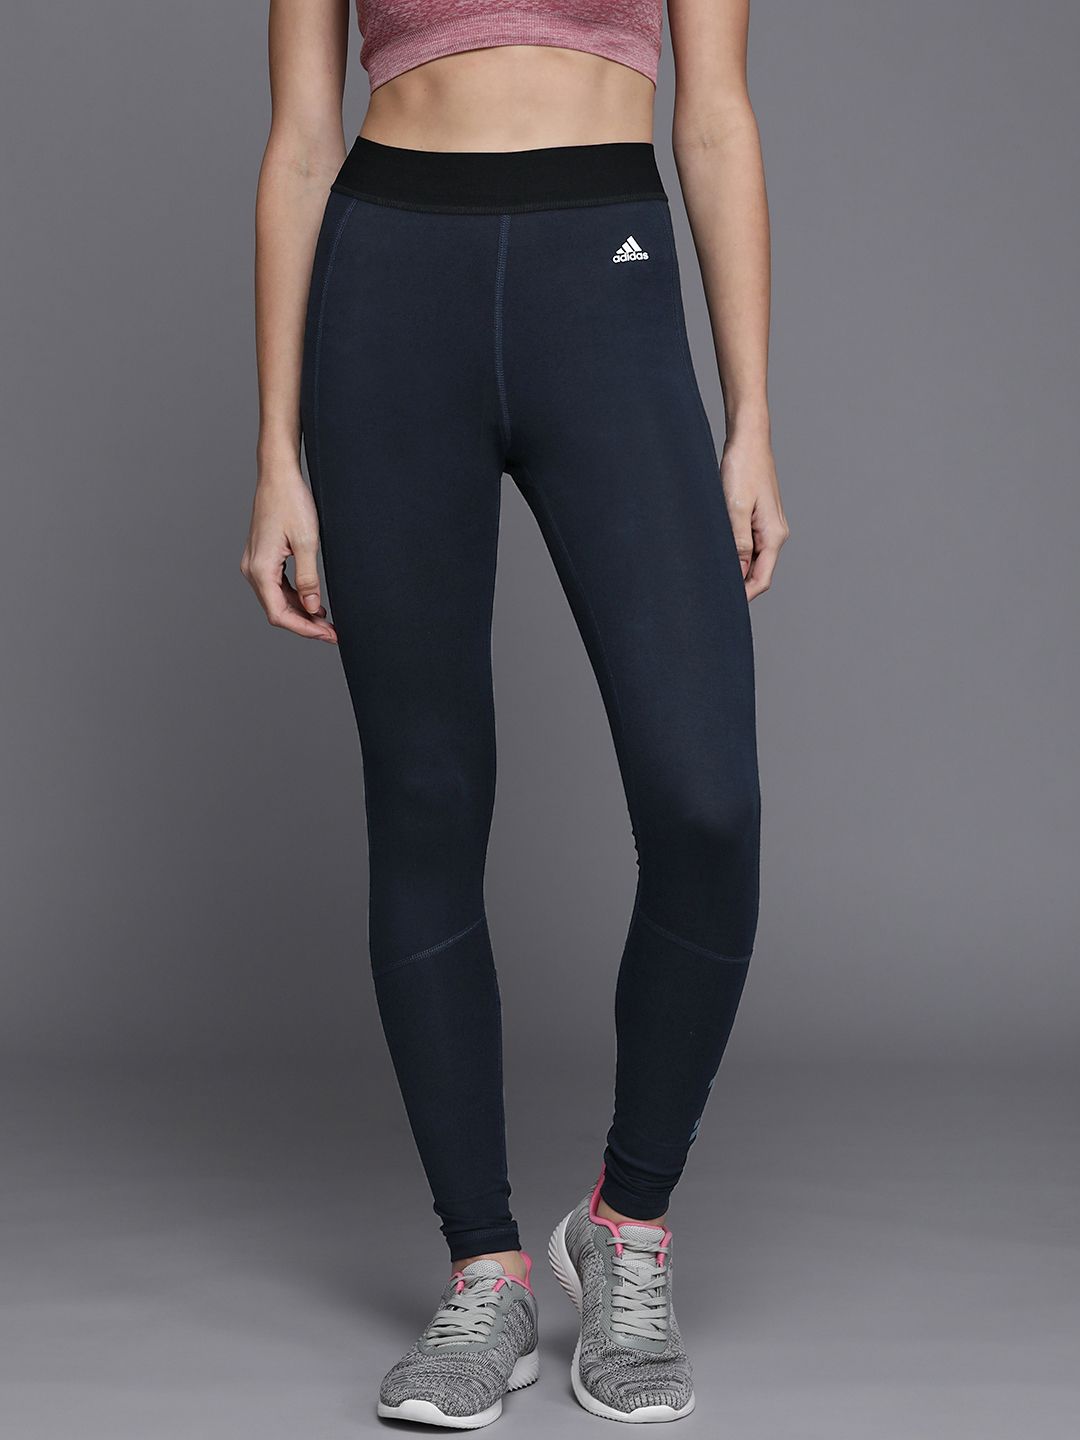 ADIDAS Women Navy Blue Solid Tights Price in India